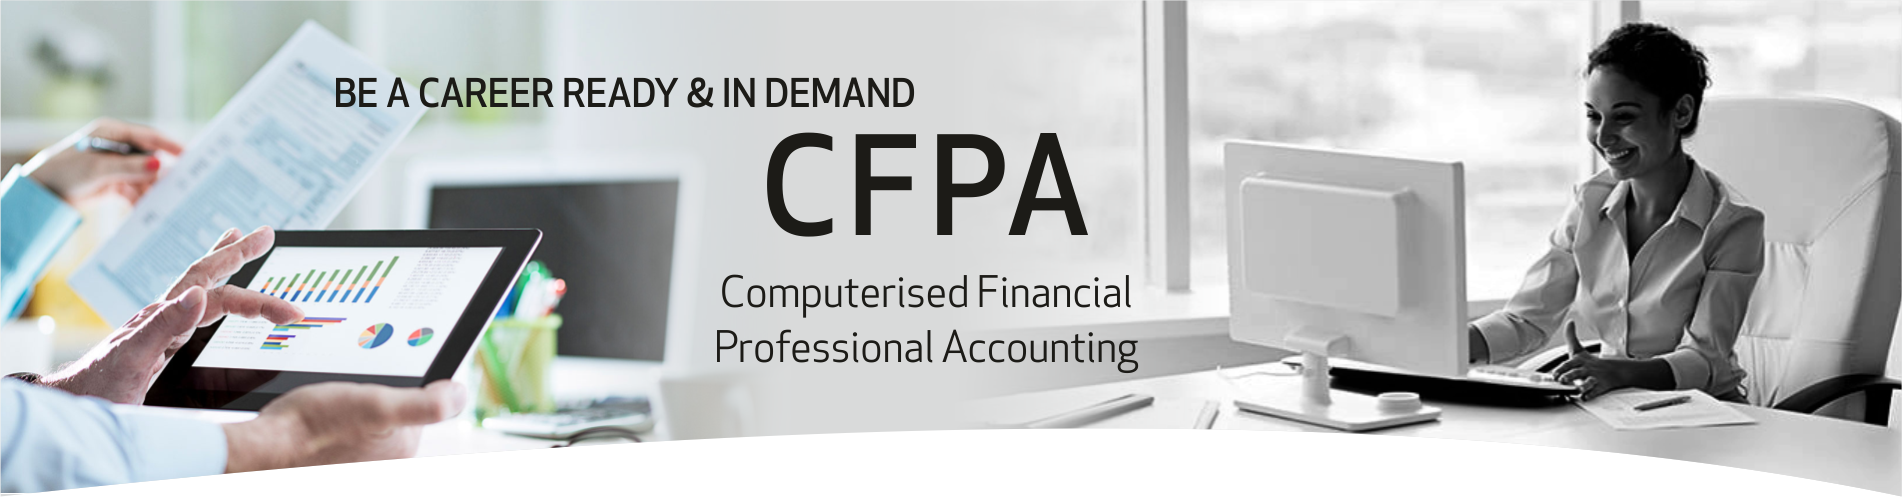 CERTIFIED FINANCIAL PLANNER COURSE